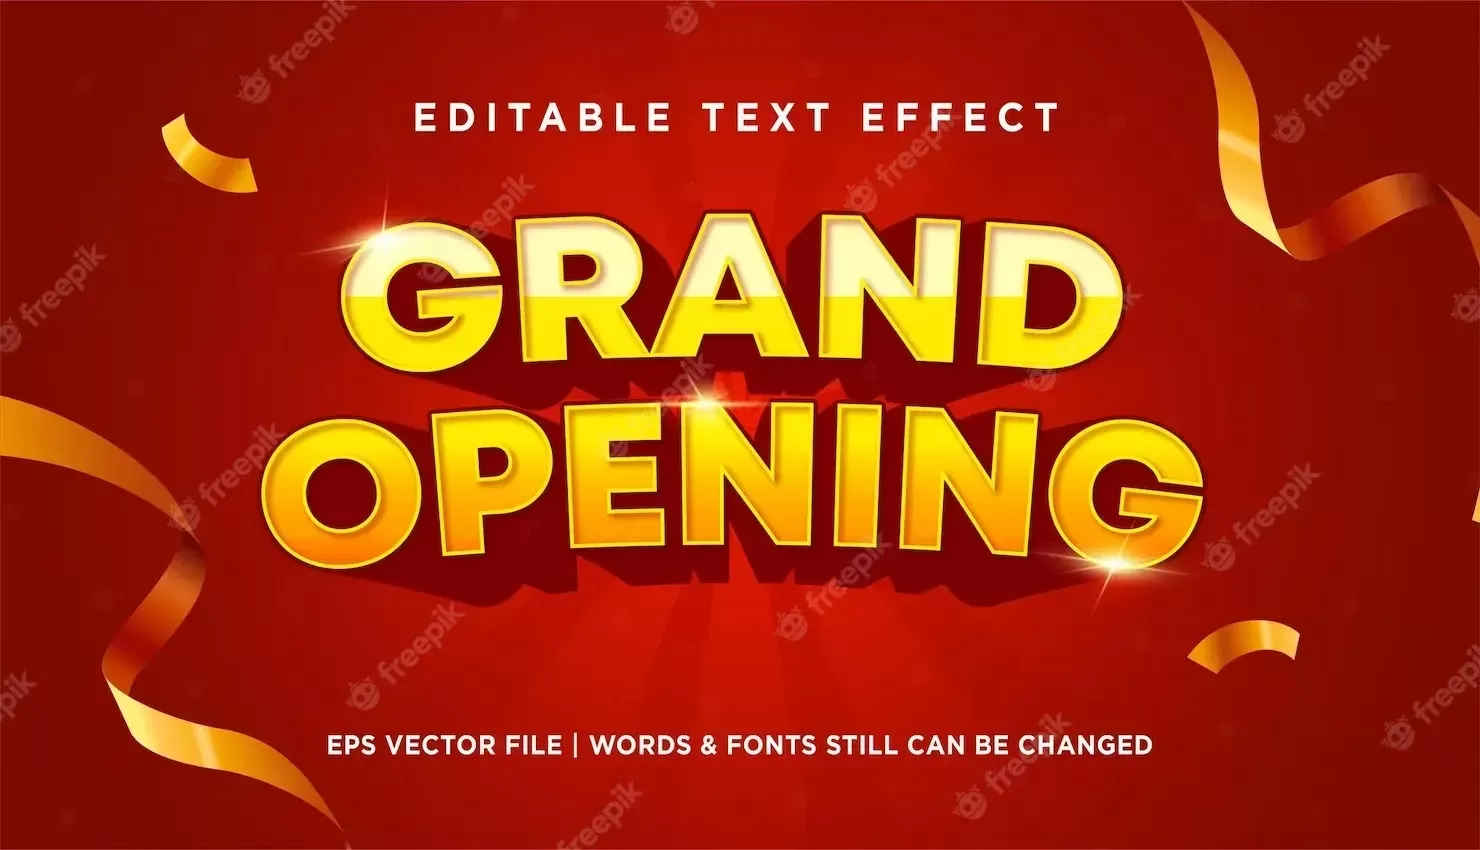 Grand opening text effect editable text vector